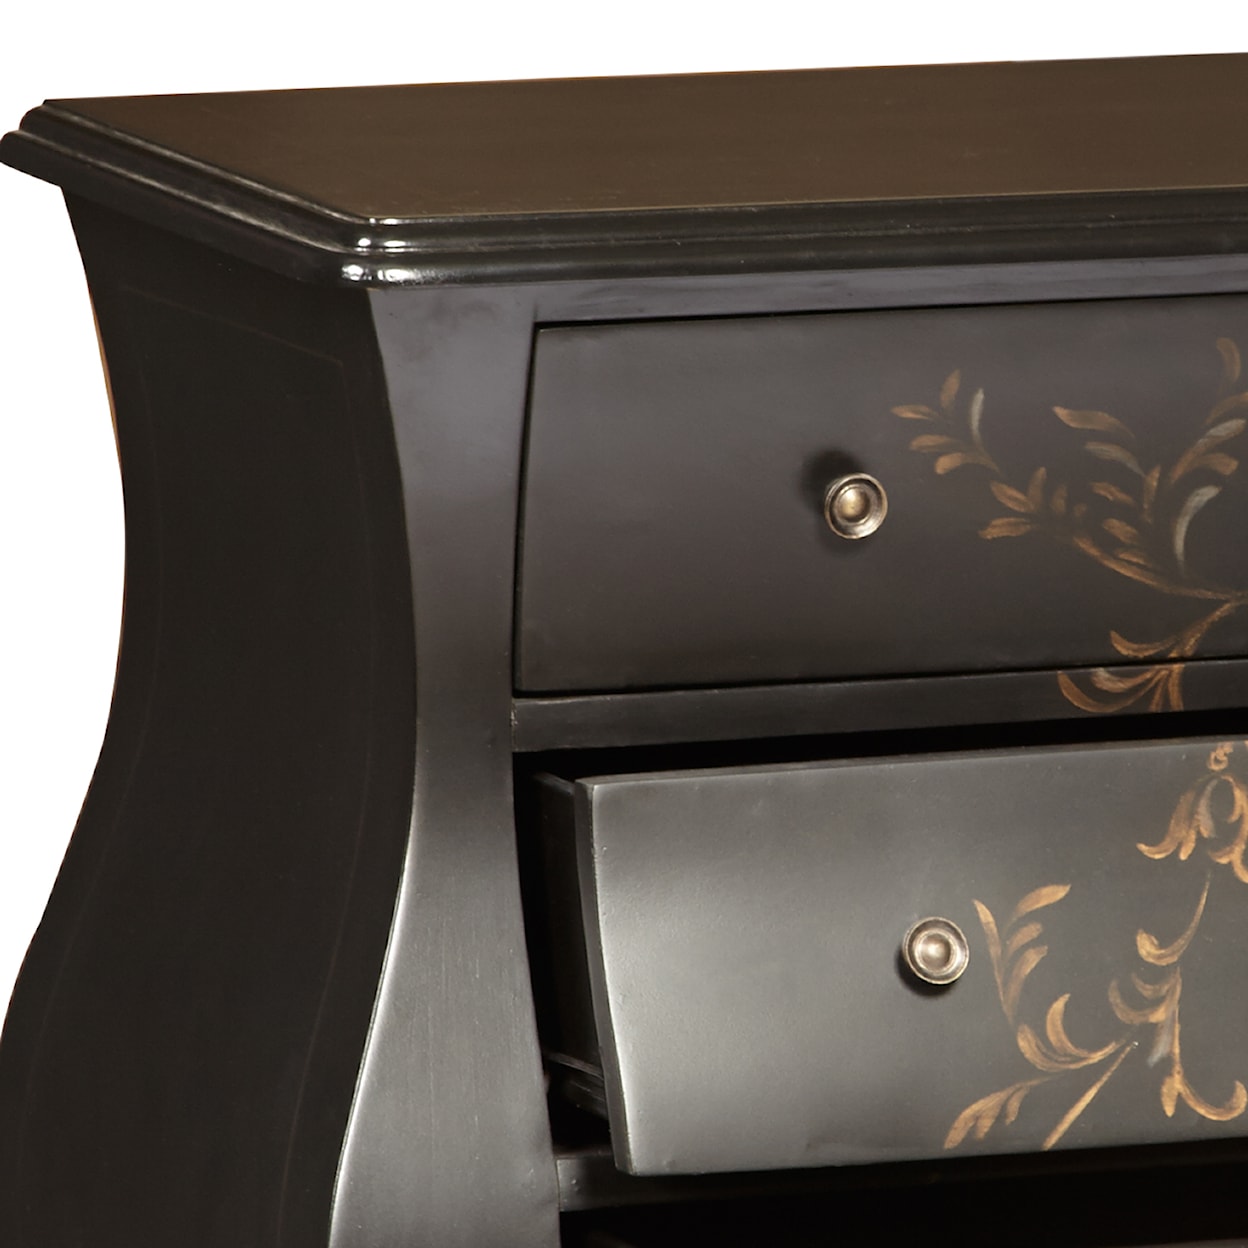 Accentrics Home Accents Three Drawer Bombay Chest in Black